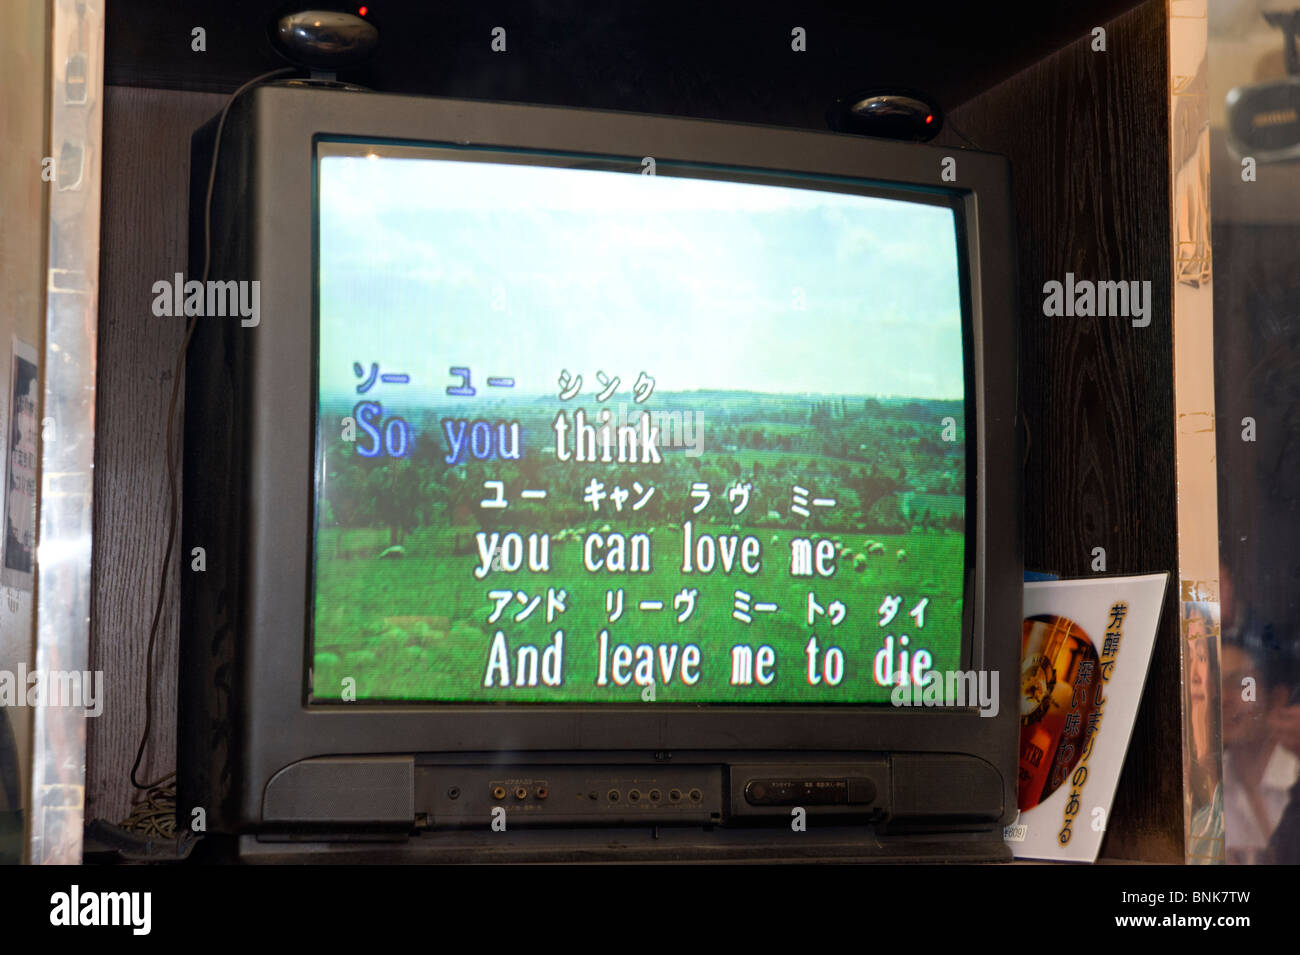 TV screen showing the words of a Queen song in a Japanese karaoke